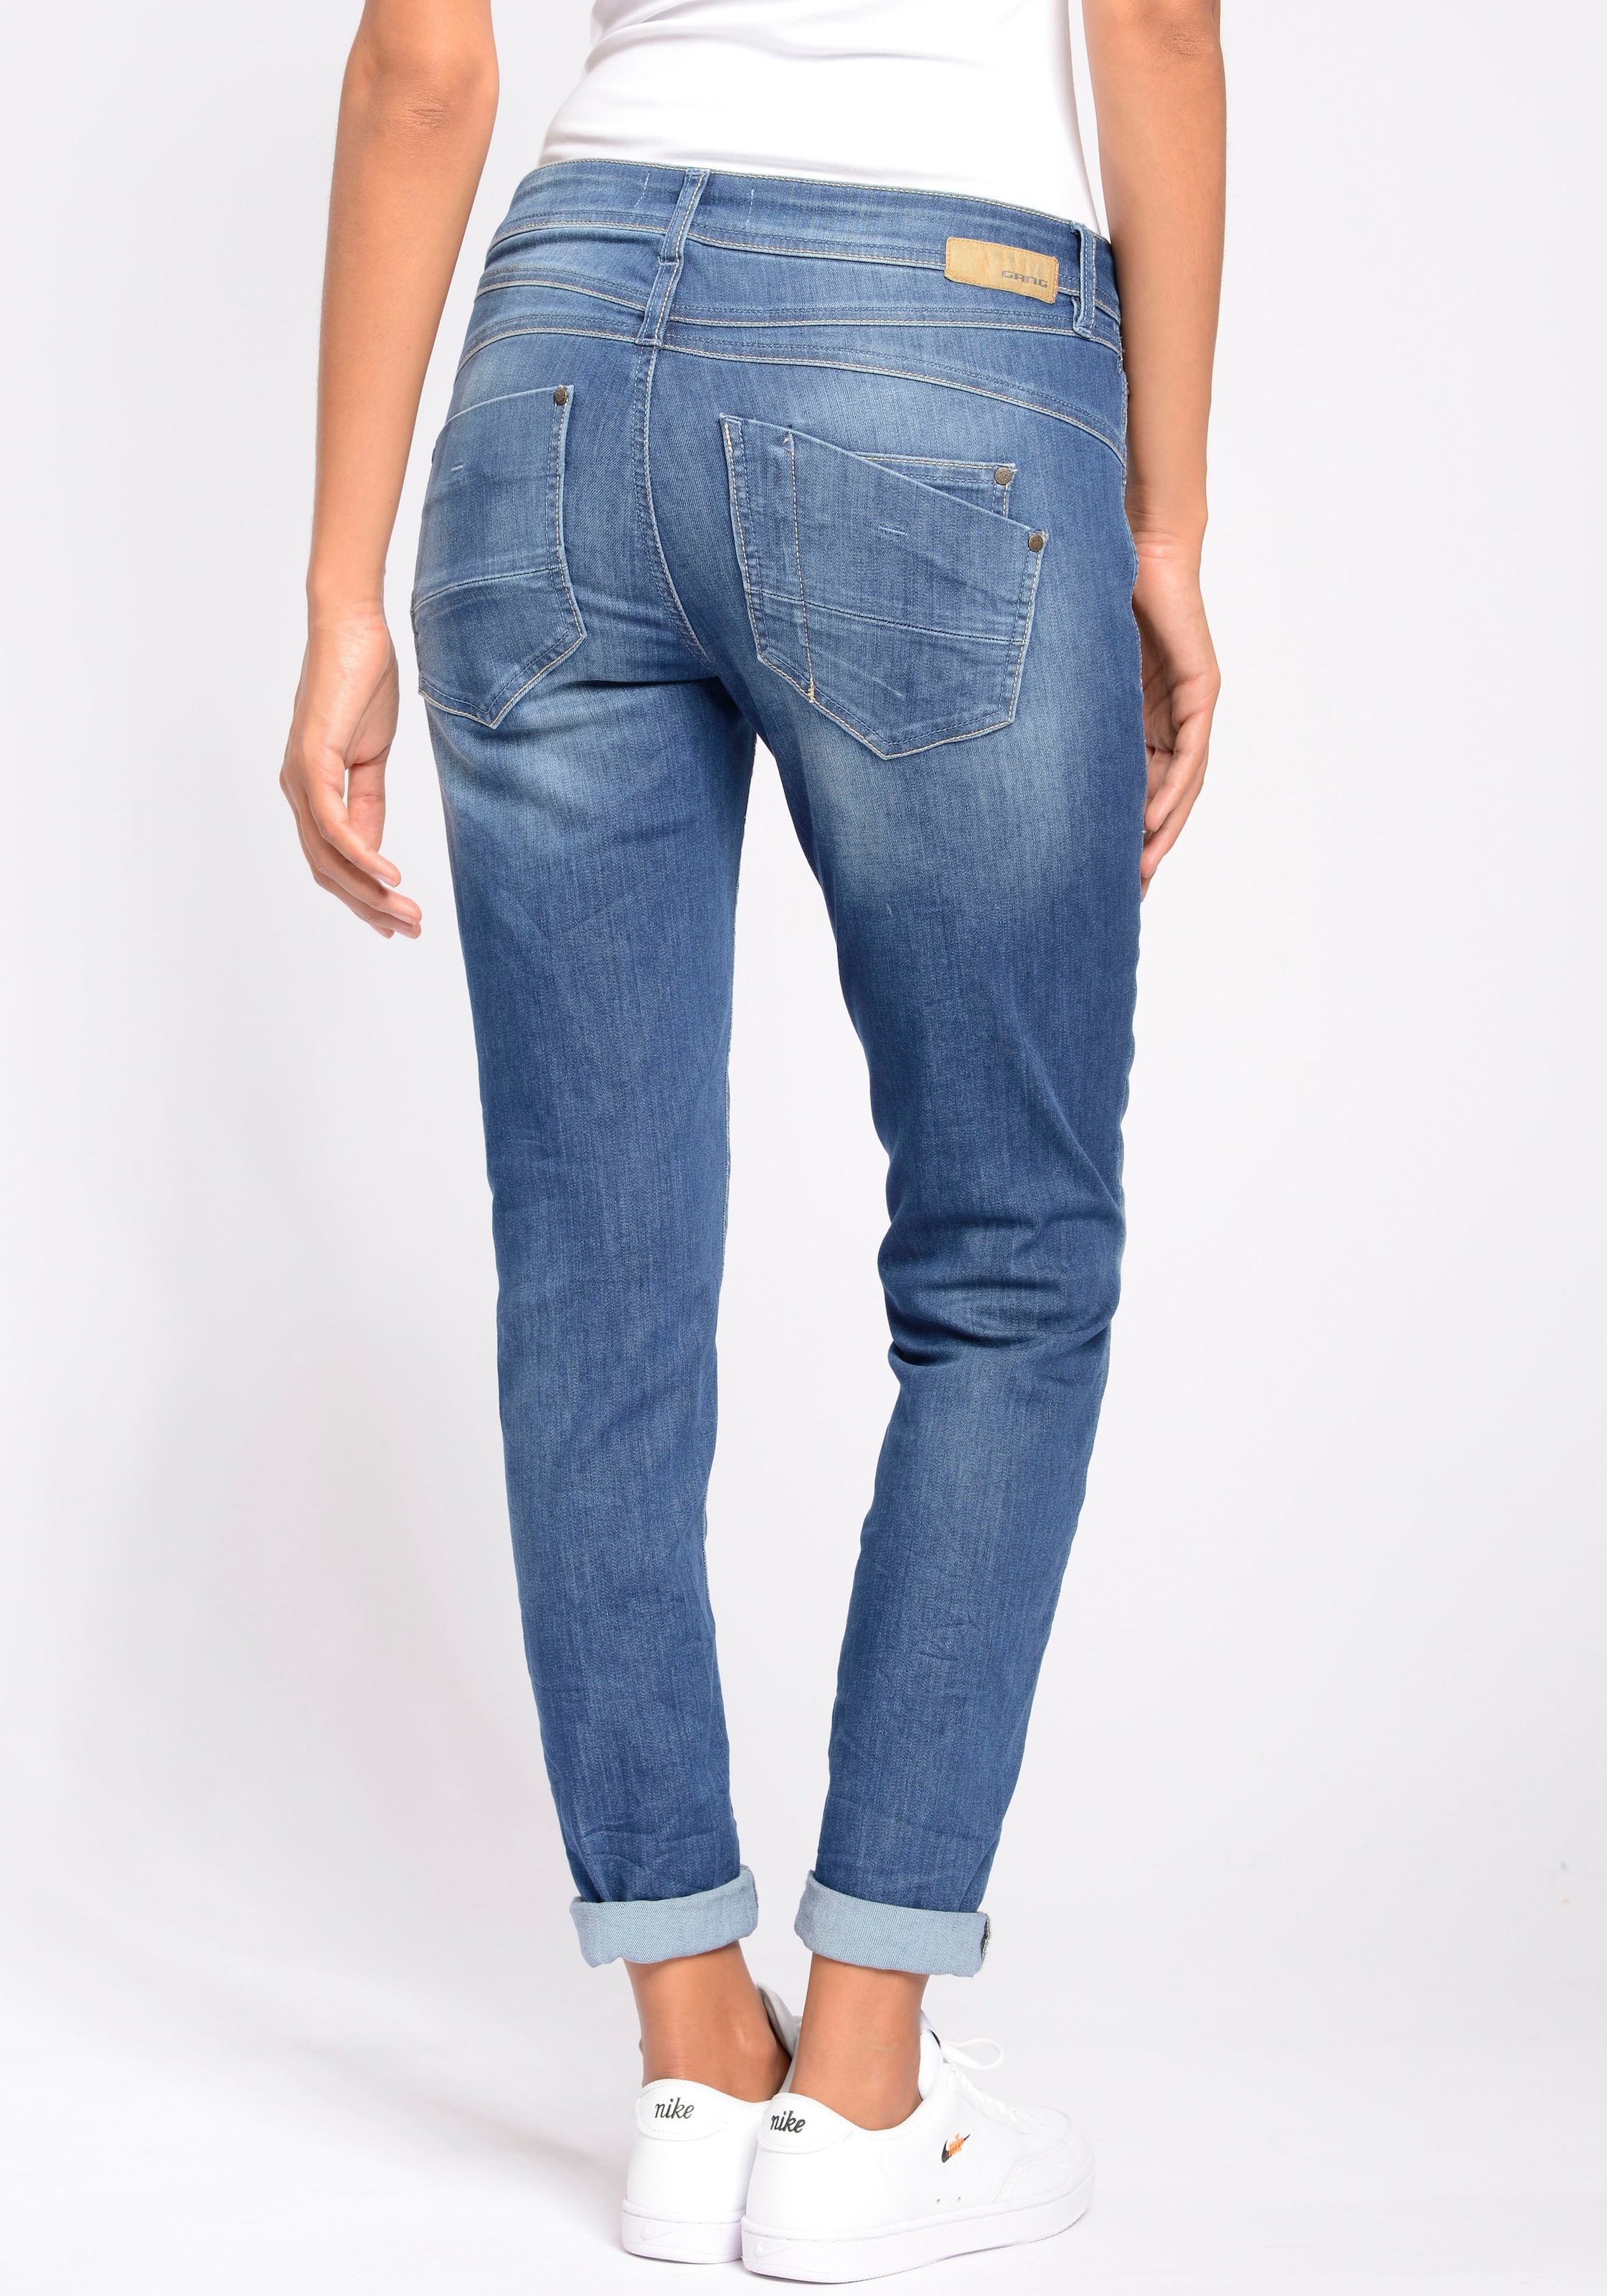 Relax-fit-Jeans »94Amelie Used-Effekten GANG bei Fit«, ♕ Relaxed mit